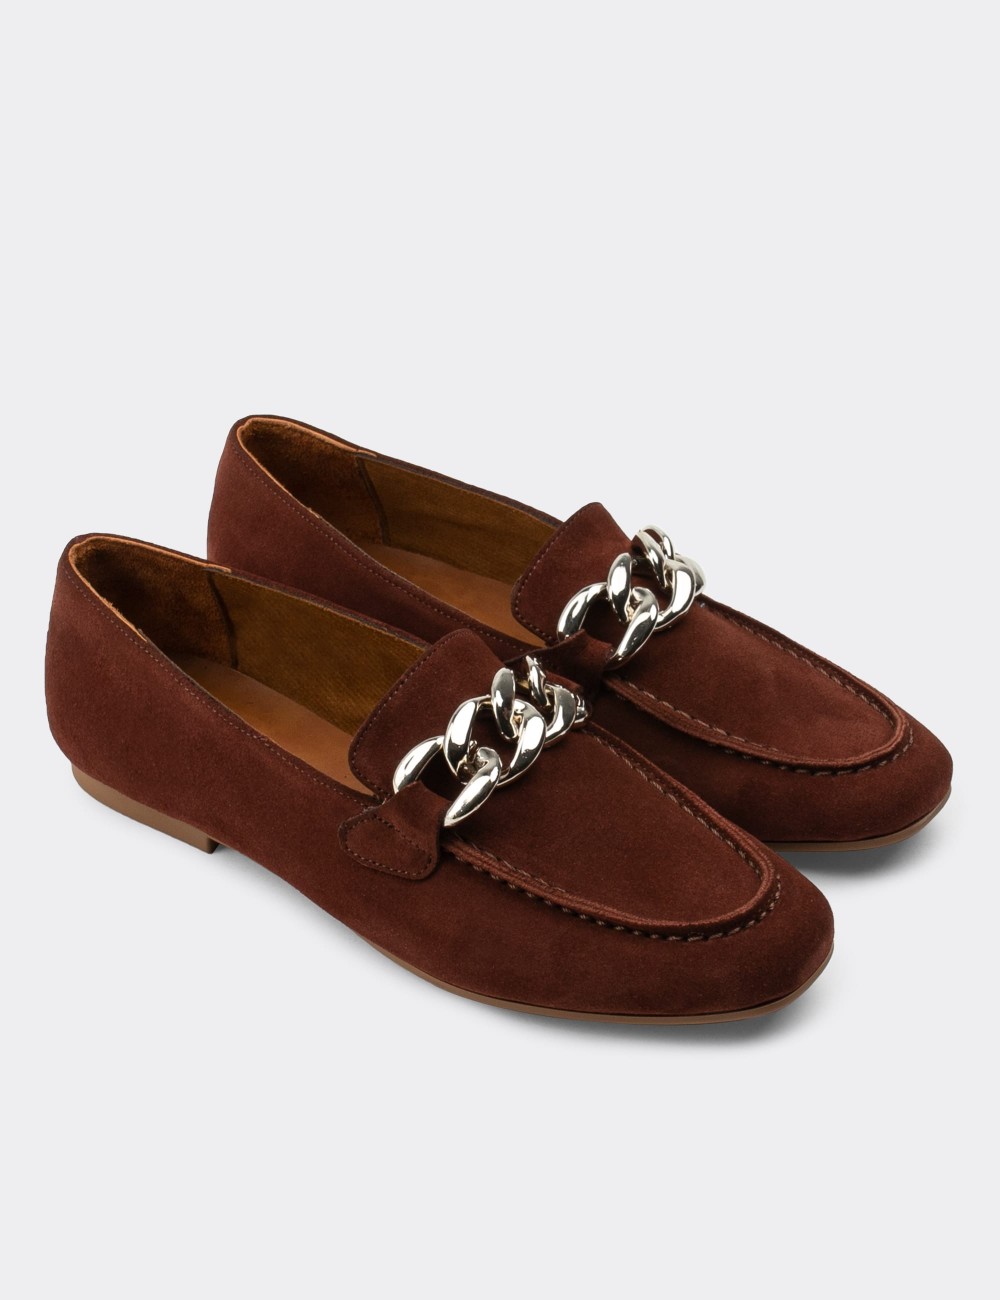 Brown Suede Leather Loafers - 01915ZKHVC01